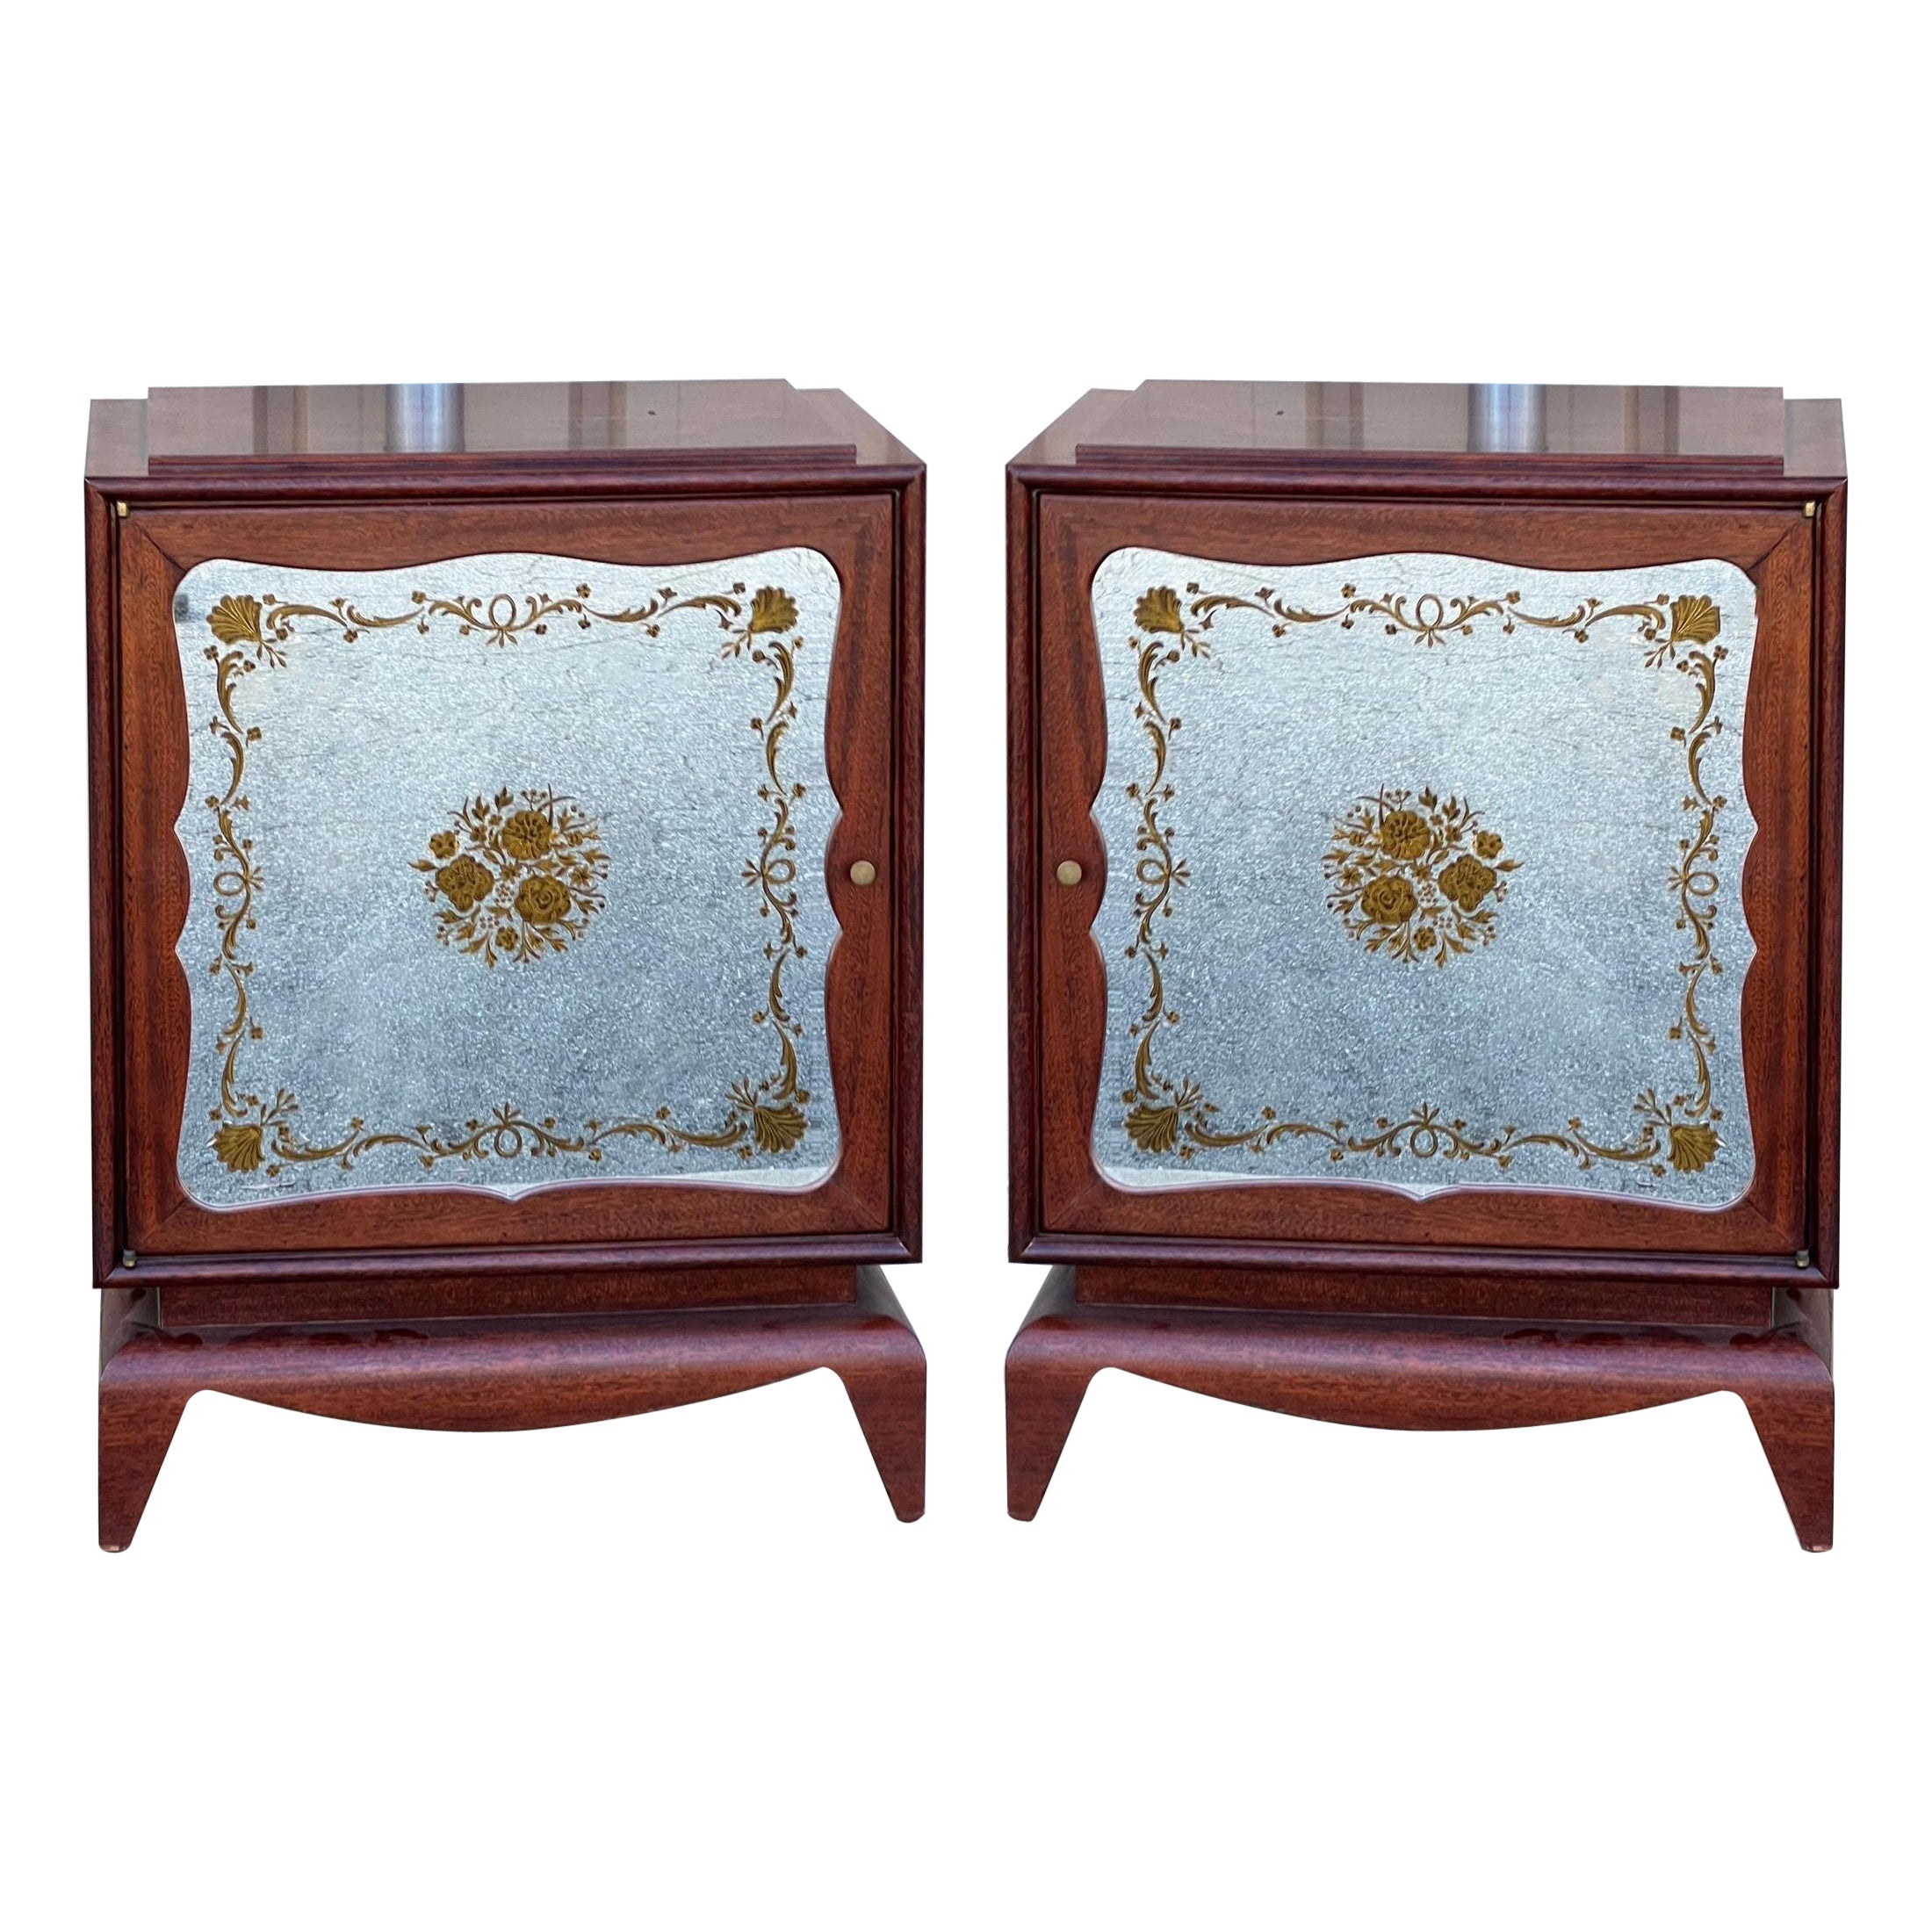 Hollywood Regency Style Mirrored Cabinets Att. Grosfeld House For Sale